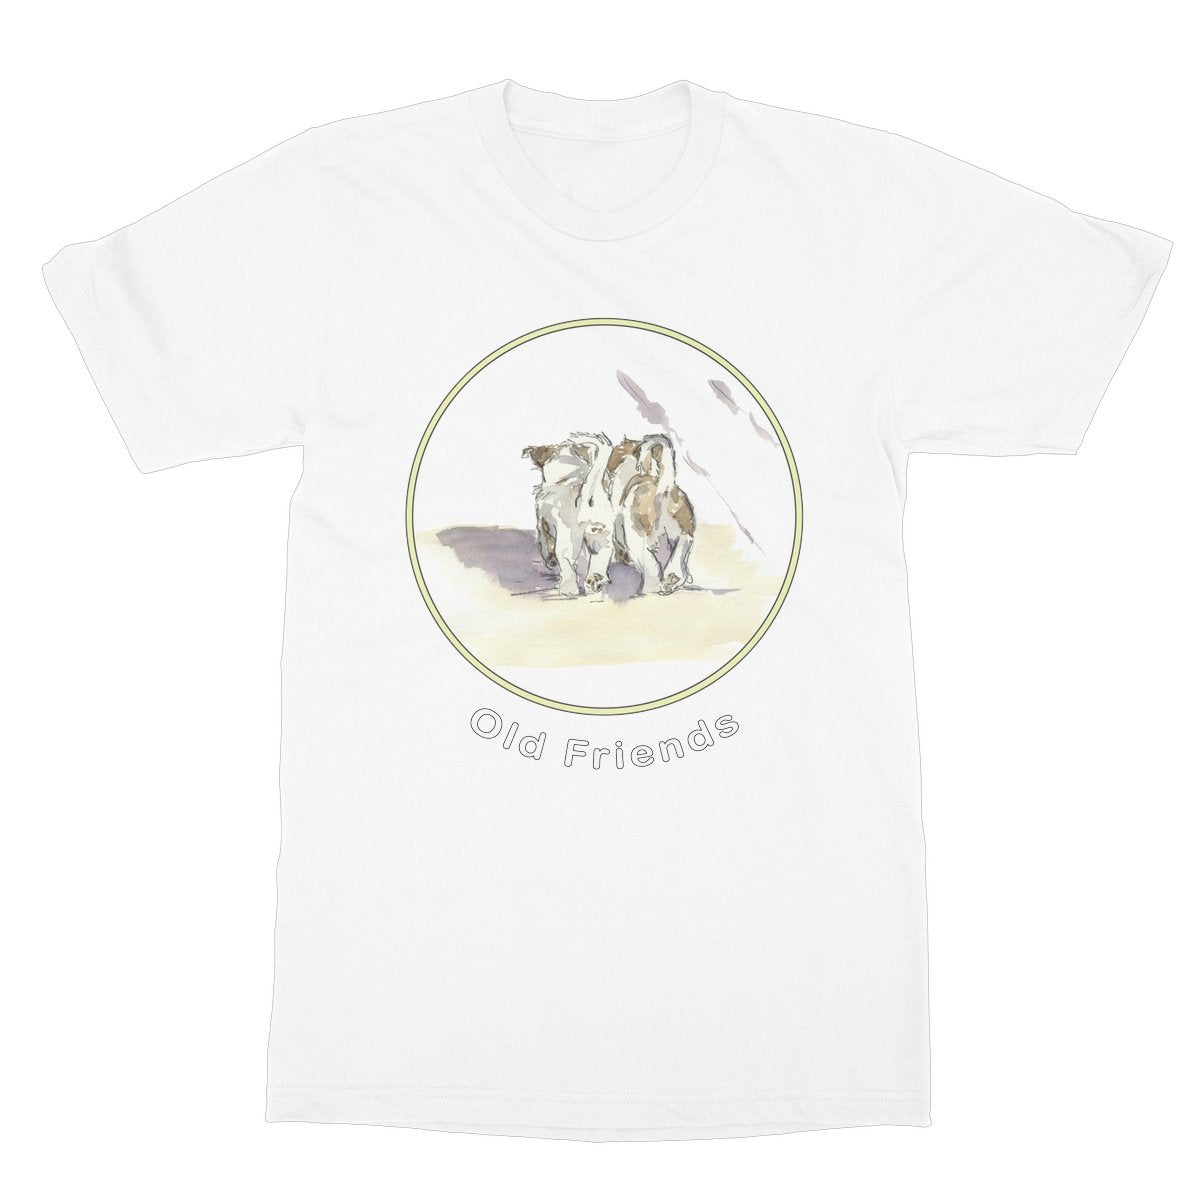 Unisex Softstyle T-Shirt - 'Old Friends'